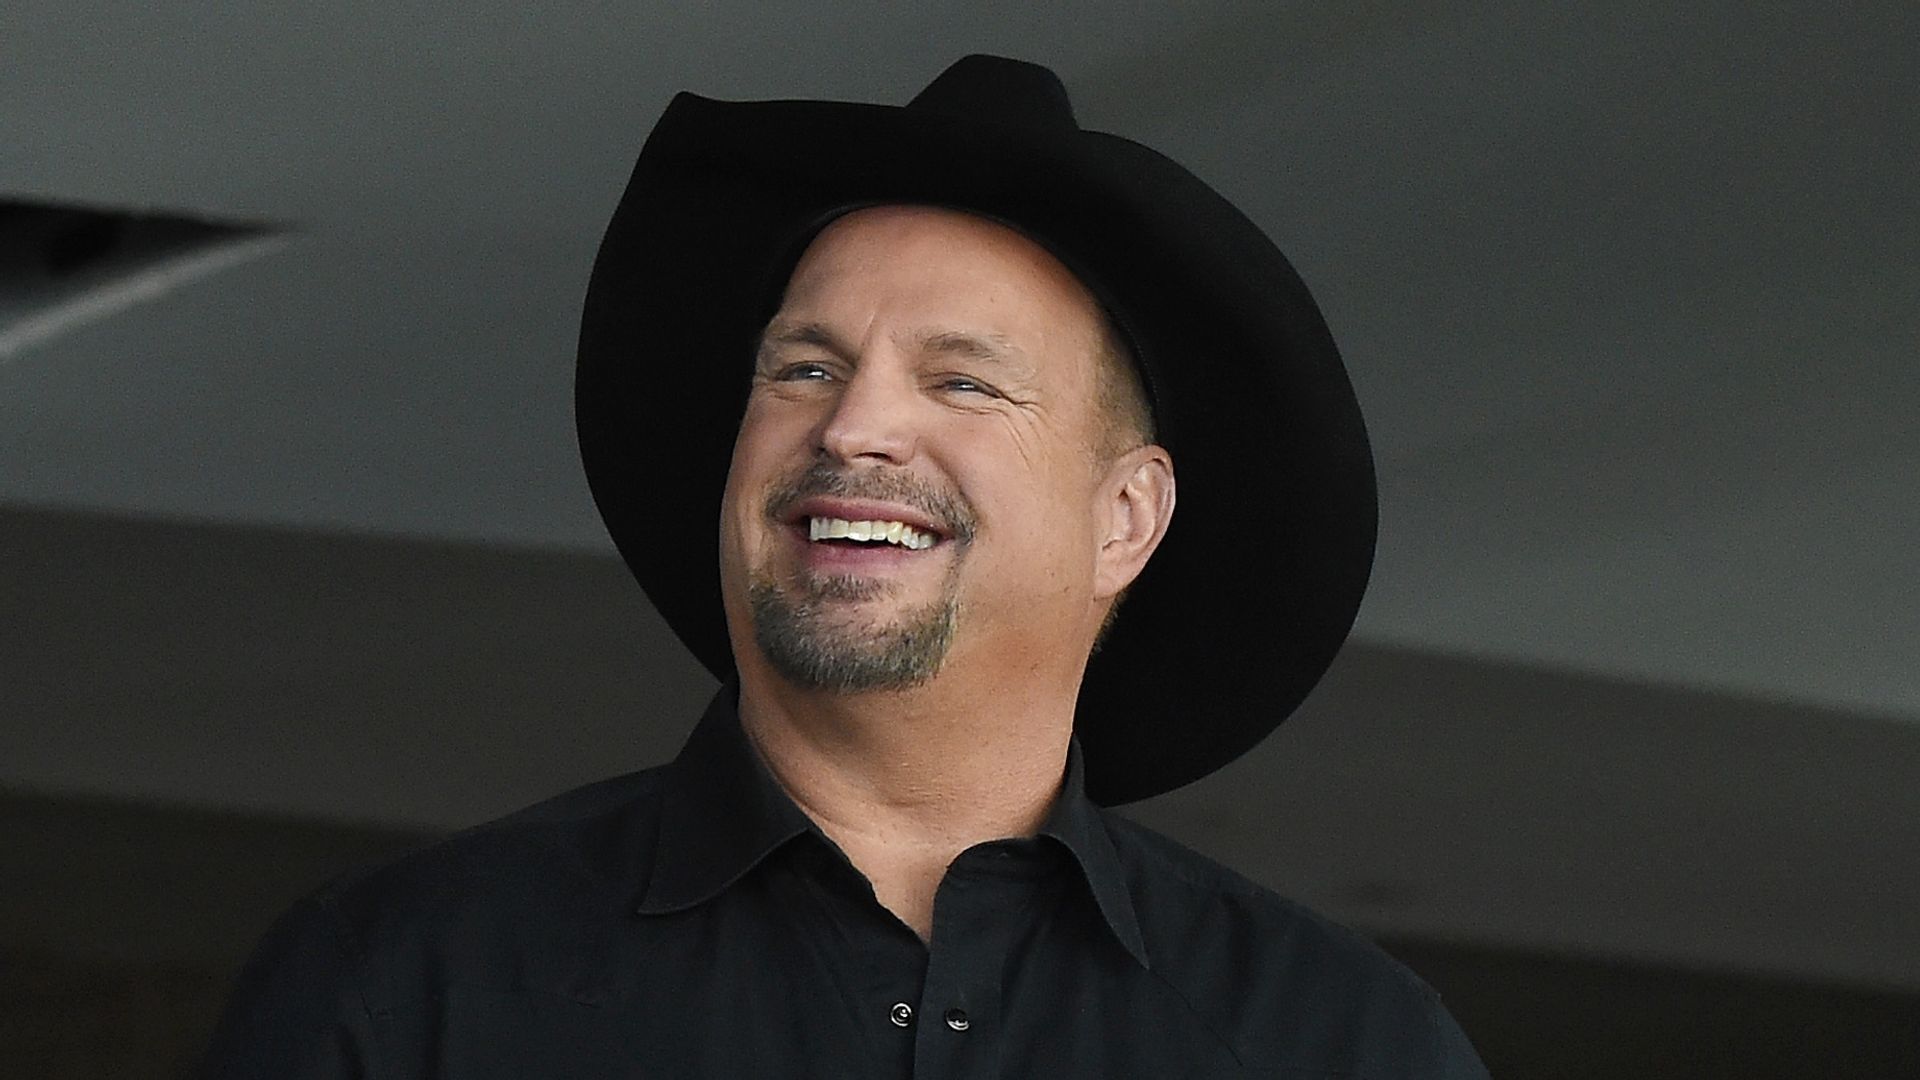 Singer/songwriter Garth Brooks smiles during a news conference to discuss plans for his upcoming concerts at the new Las Vegas Arena on December 3, 2015 in Las Vegas, Nevada. The Las Vegas Arena is scheduled to open in April 2016 and Brooks will perform t